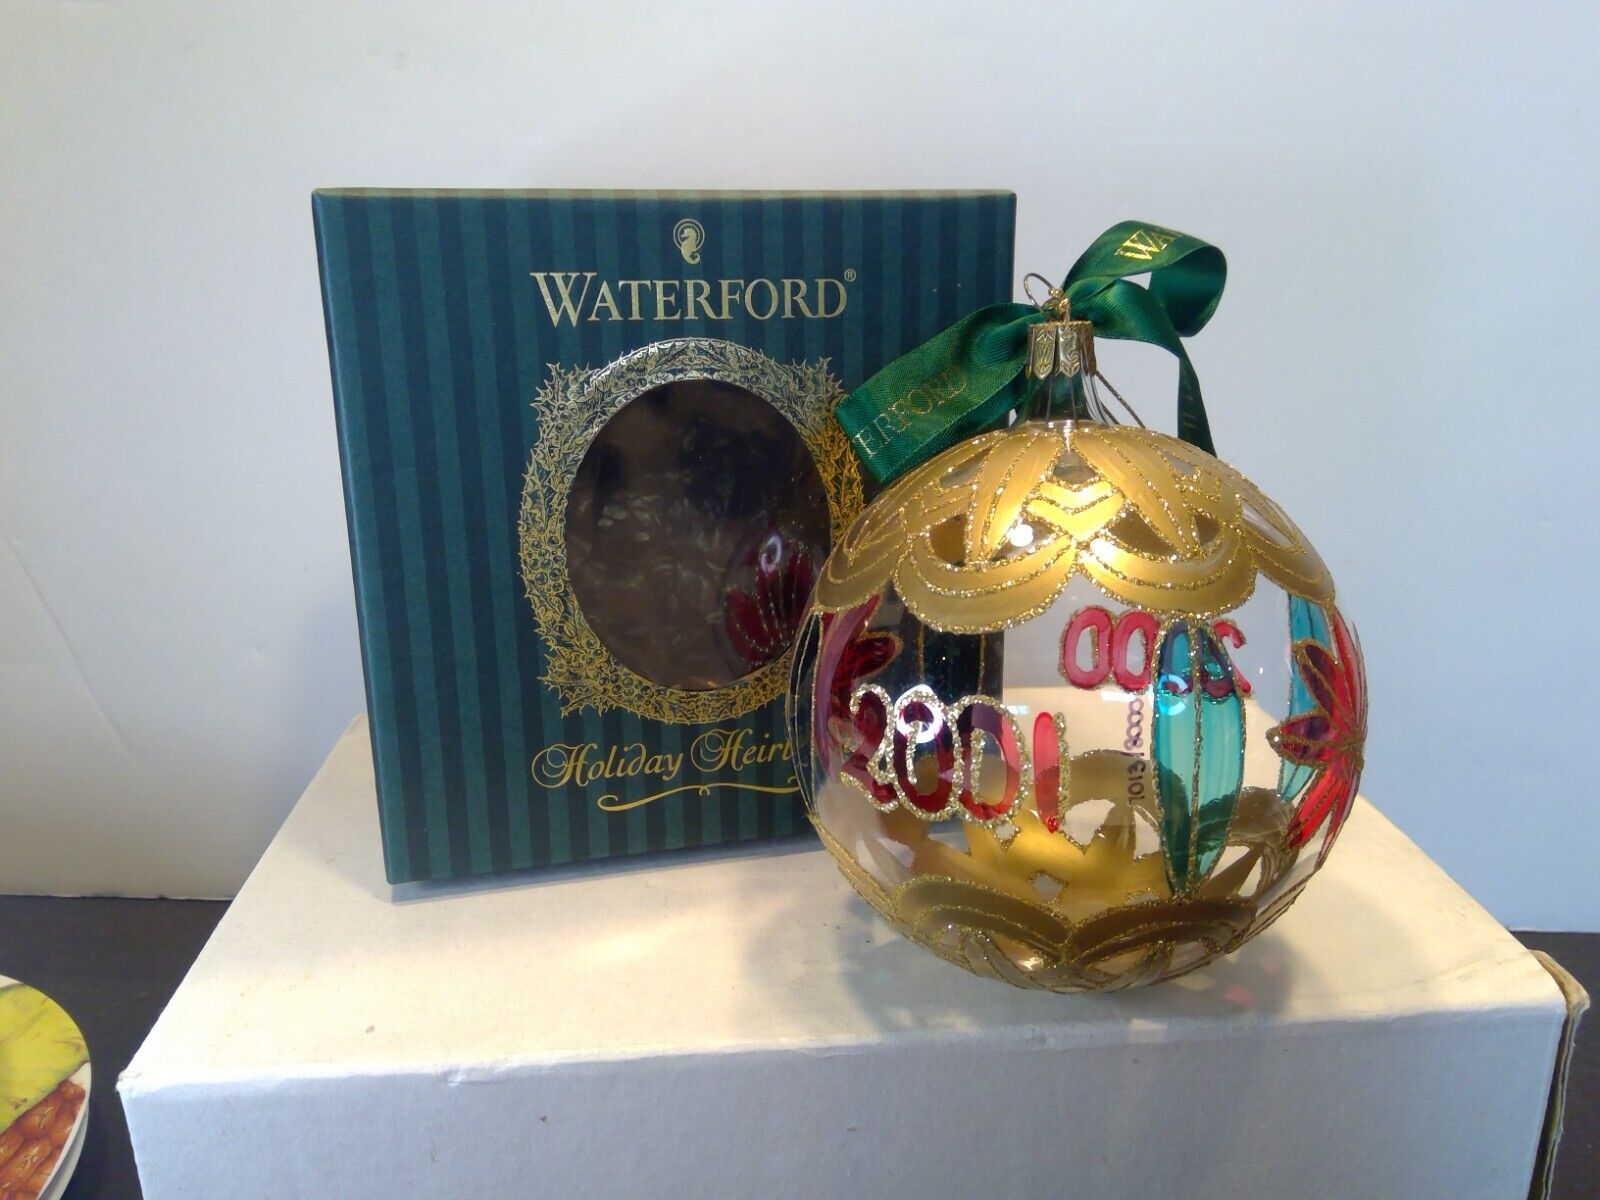 Waterford Holiday Heirlooms LE 7013 of 8000 New Year 2000/2001 Ornament